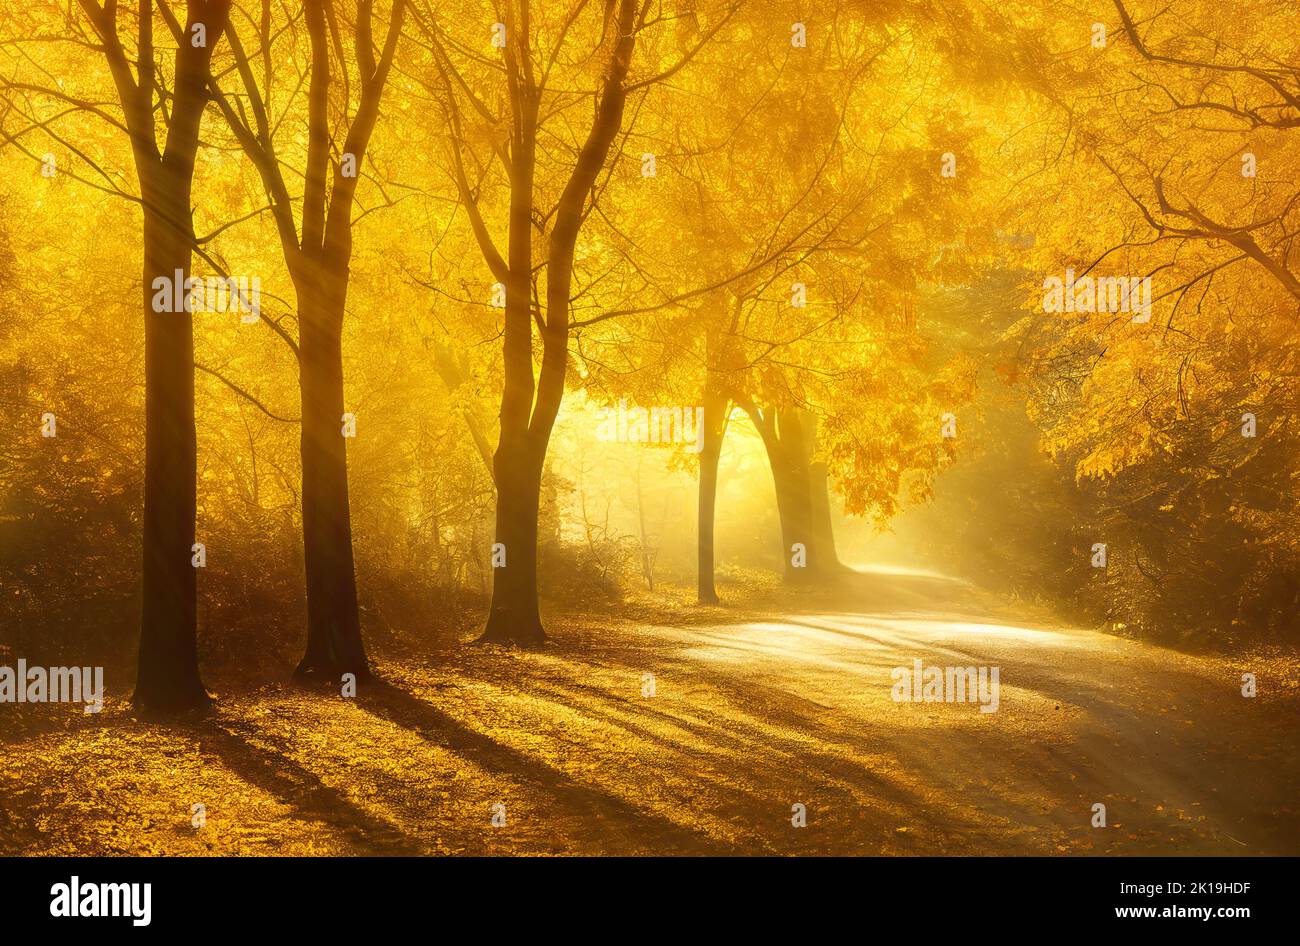 Sunlit alley in autumn park, golden leaves and yellow mist. Digital illustration based on render by neural network Stock Photo